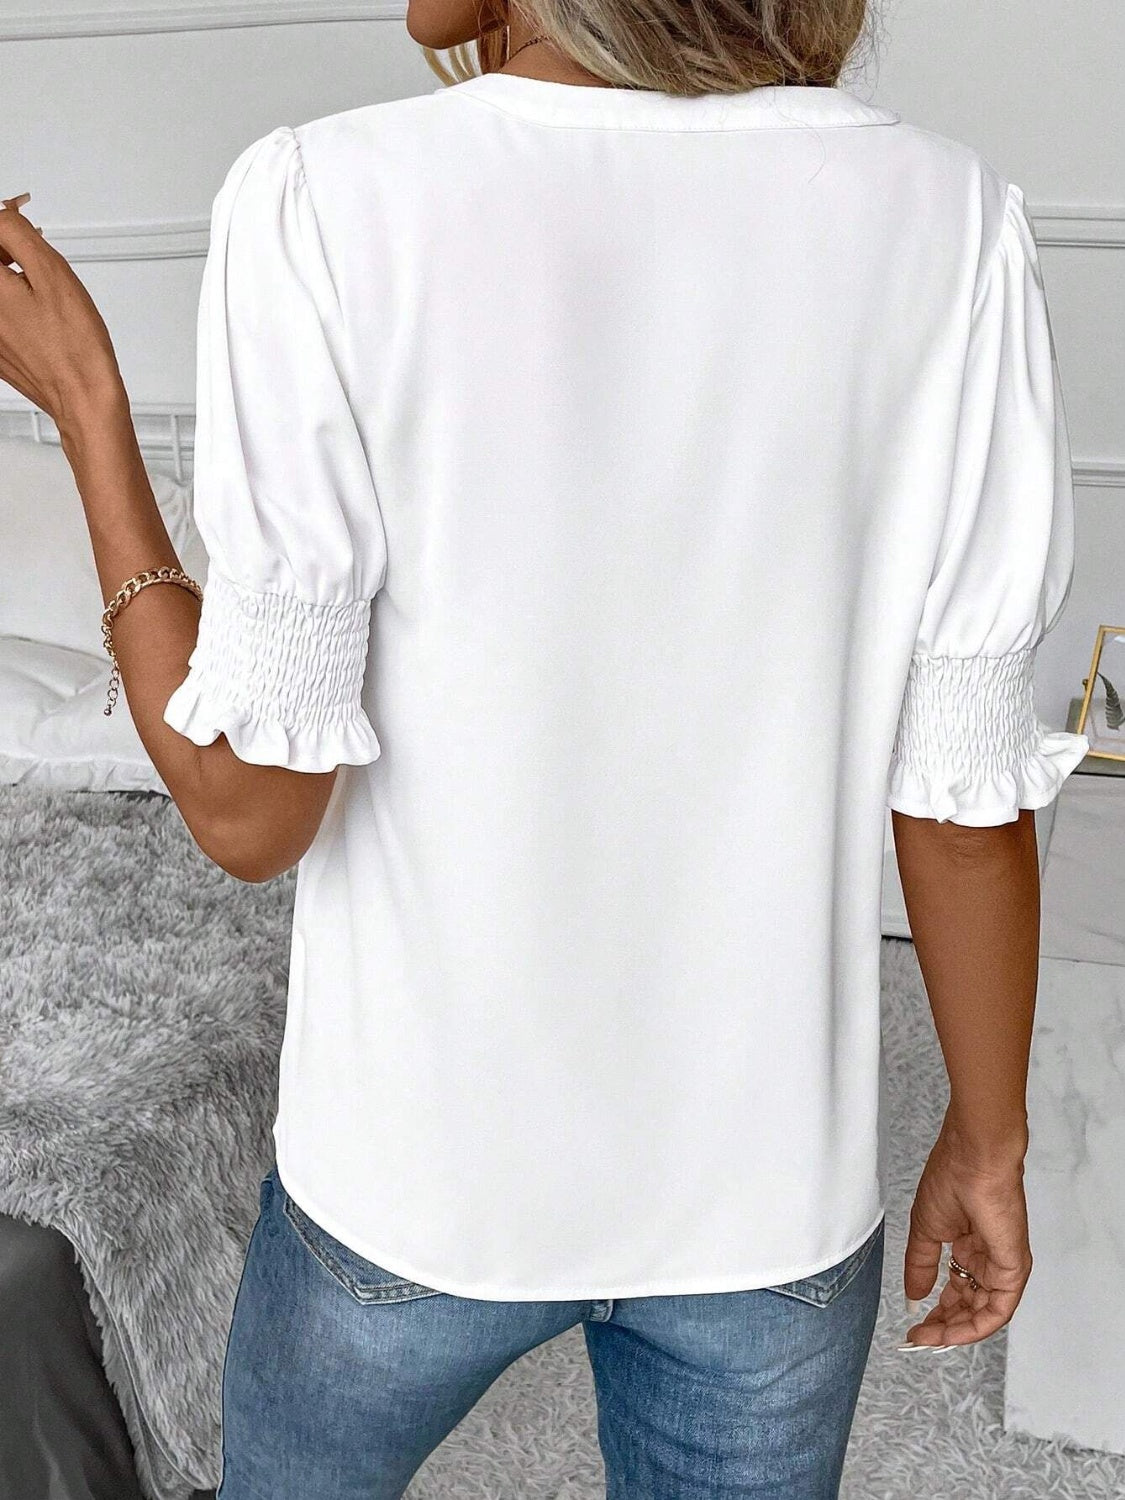 Classic white blouse with notched neck and ruffle accents on sleeves